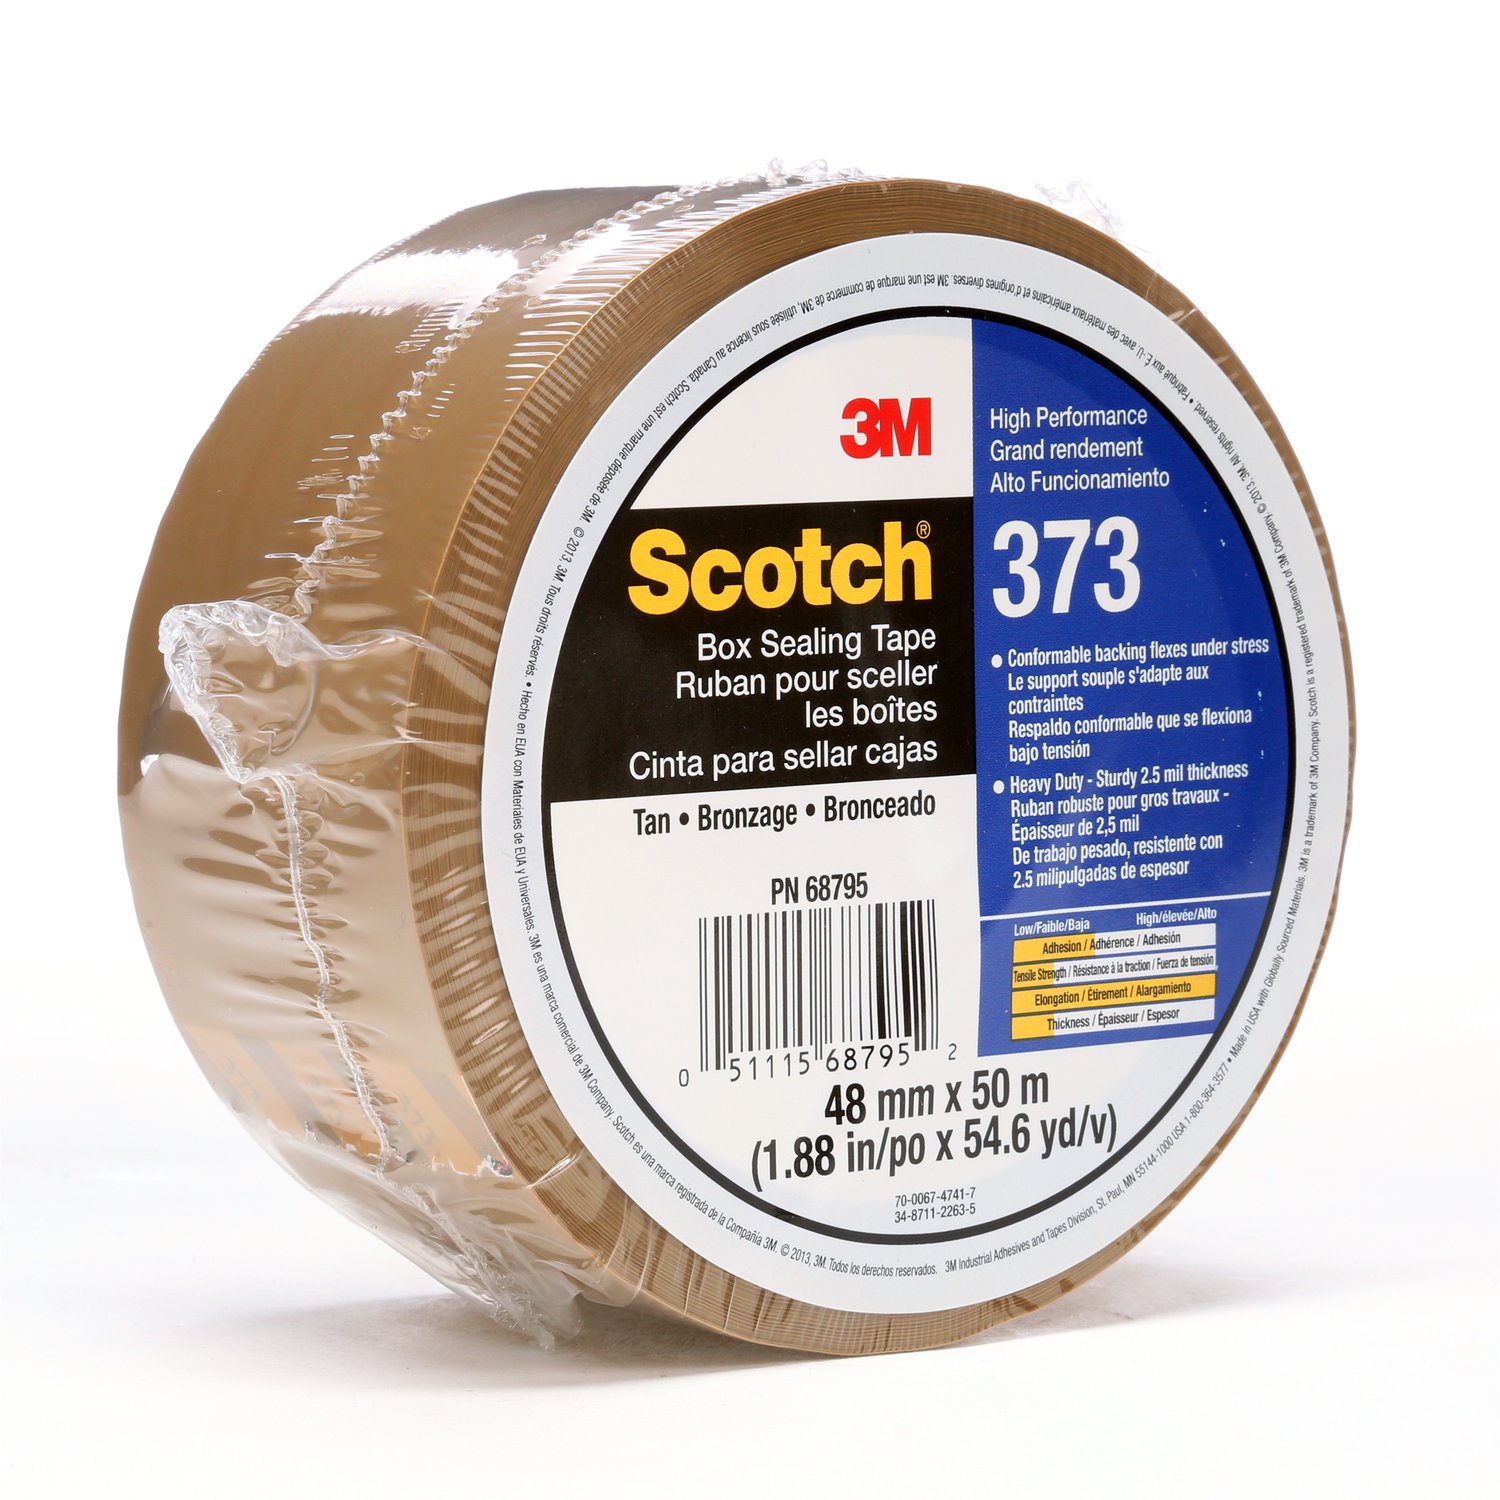 7010374970 - Scotch Box Sealing Tape 373, Tan, 48 mm x 50 m, 36/Case, Individually
Wrapped Conveniently Packaged